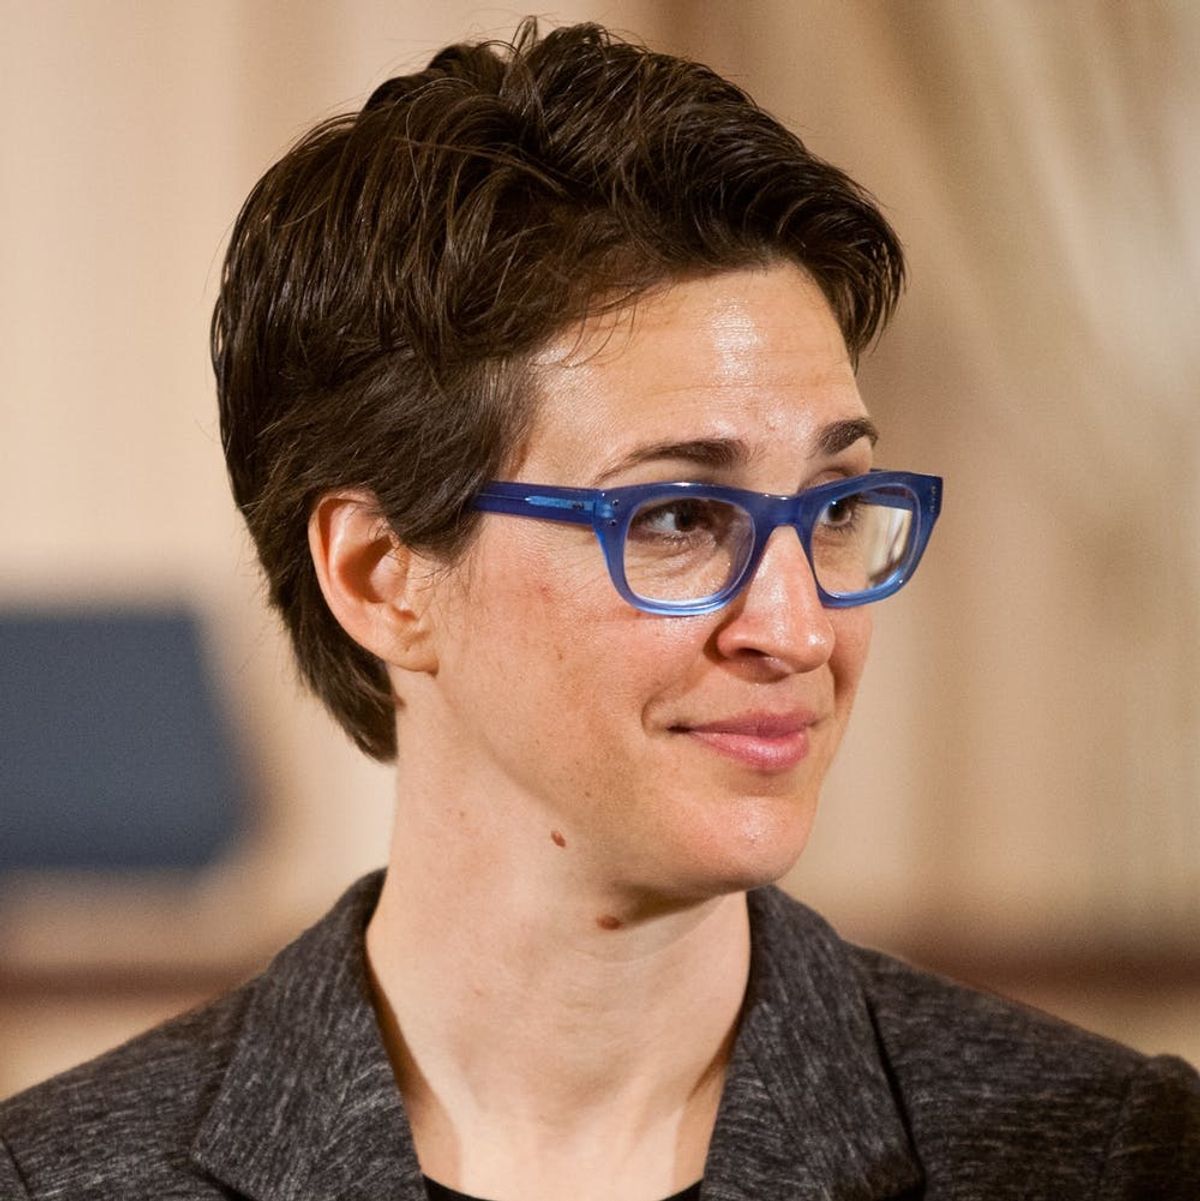 Rachel Maddow’s Trump Tax Bombshell Wasn’t Quite What People Wanted